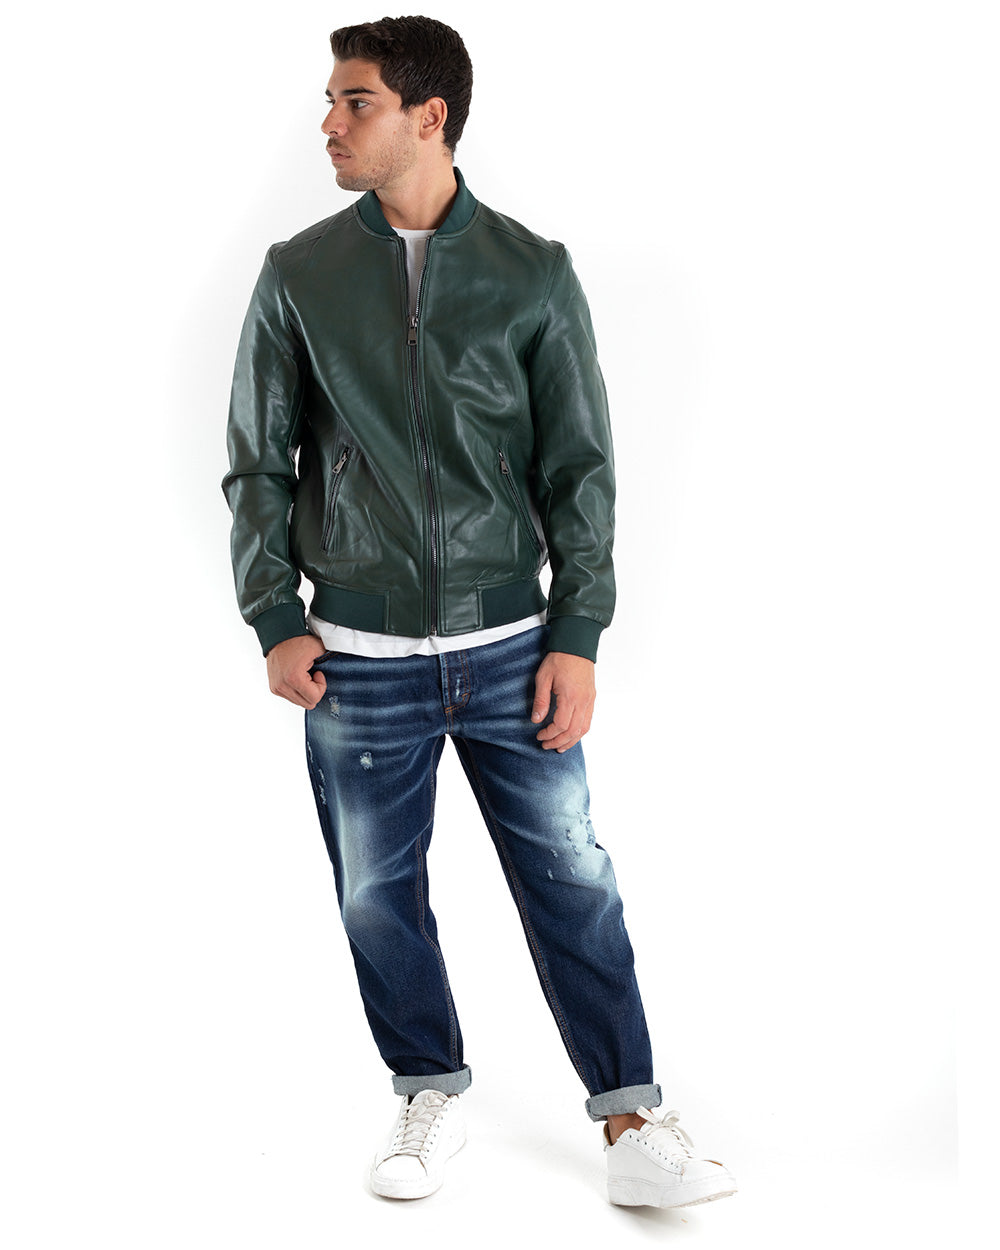 Men's College Jacket Solid Color Green Long Sleeve Faux Leather Casual GIOSAL G2866A